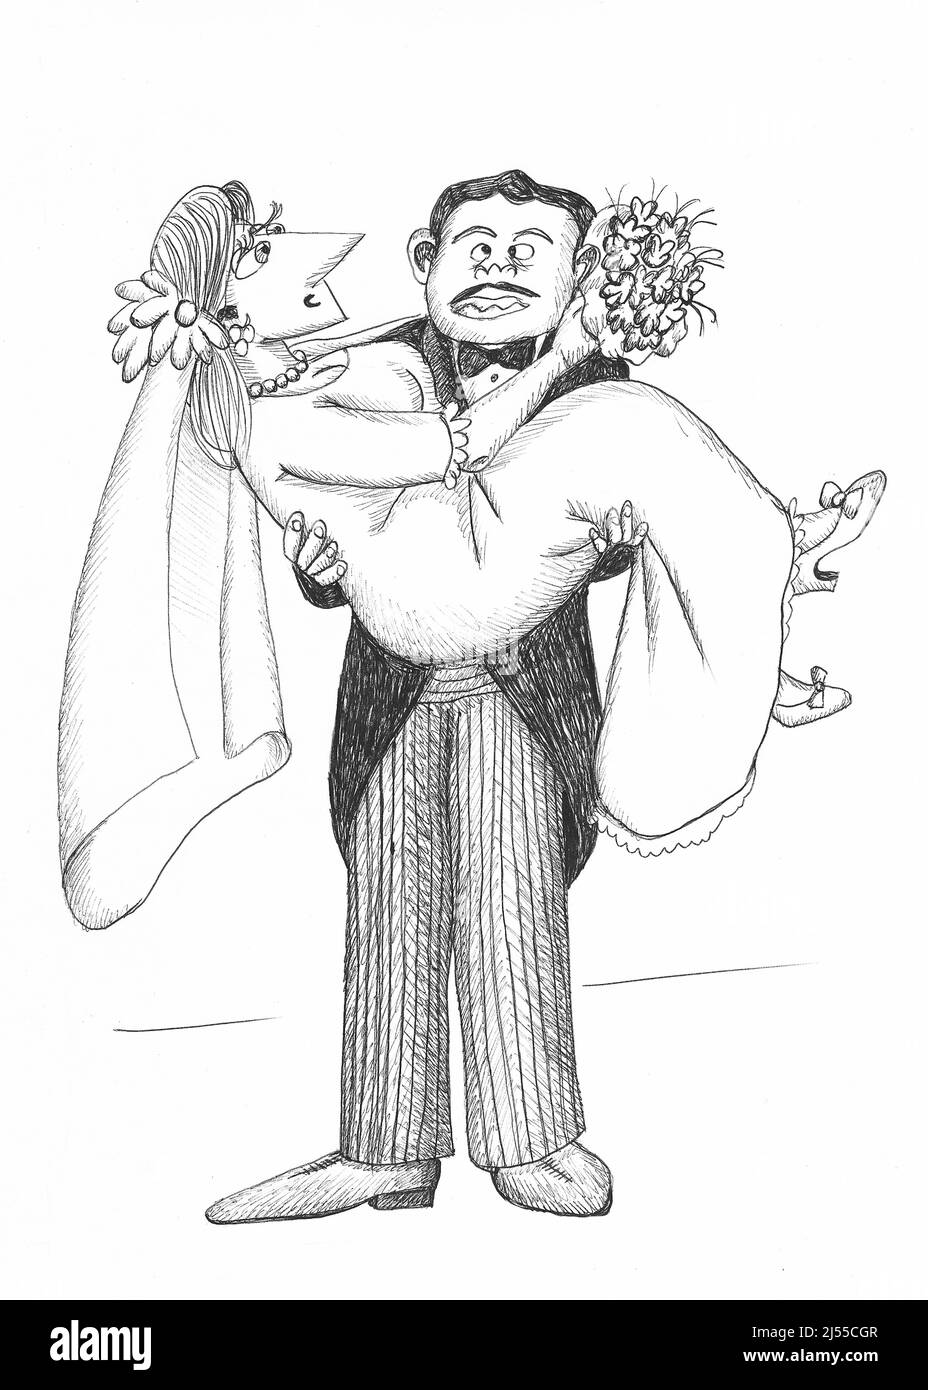 Bride and groom. Illustration. Stock Photo